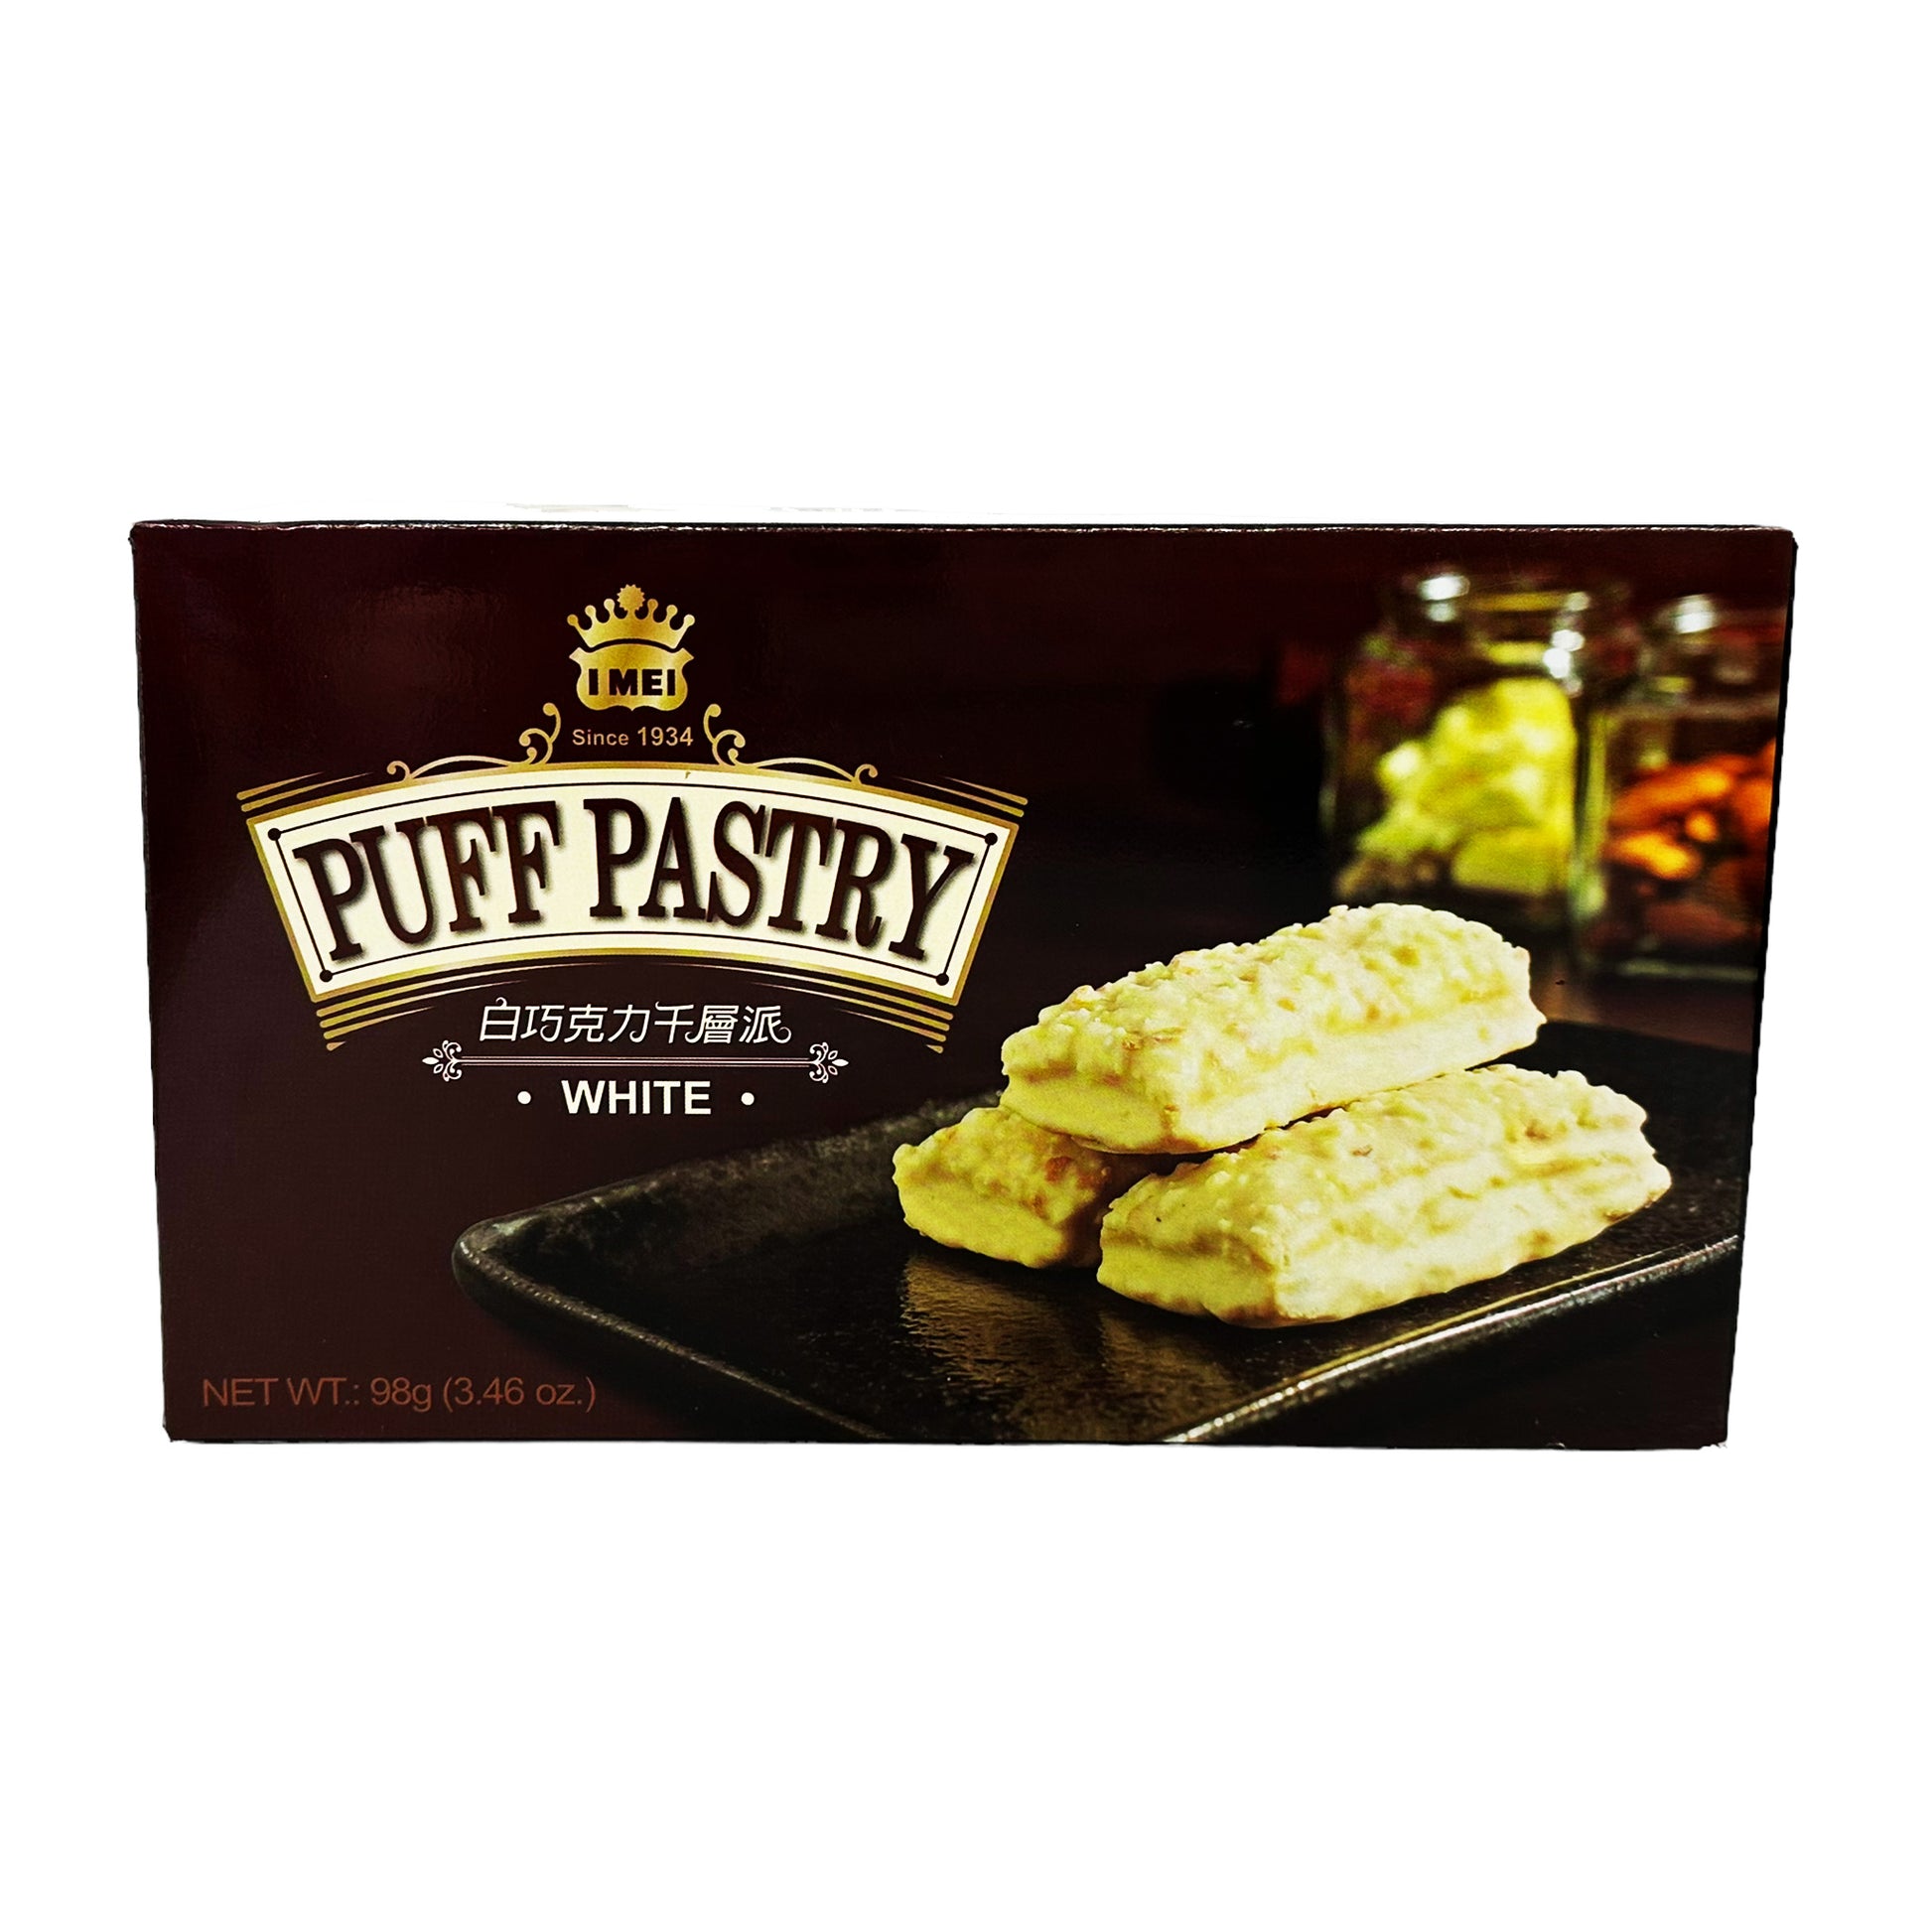 Front graphic image of Imei Puff Pastry - White Chocolate 3.46oz (98g)